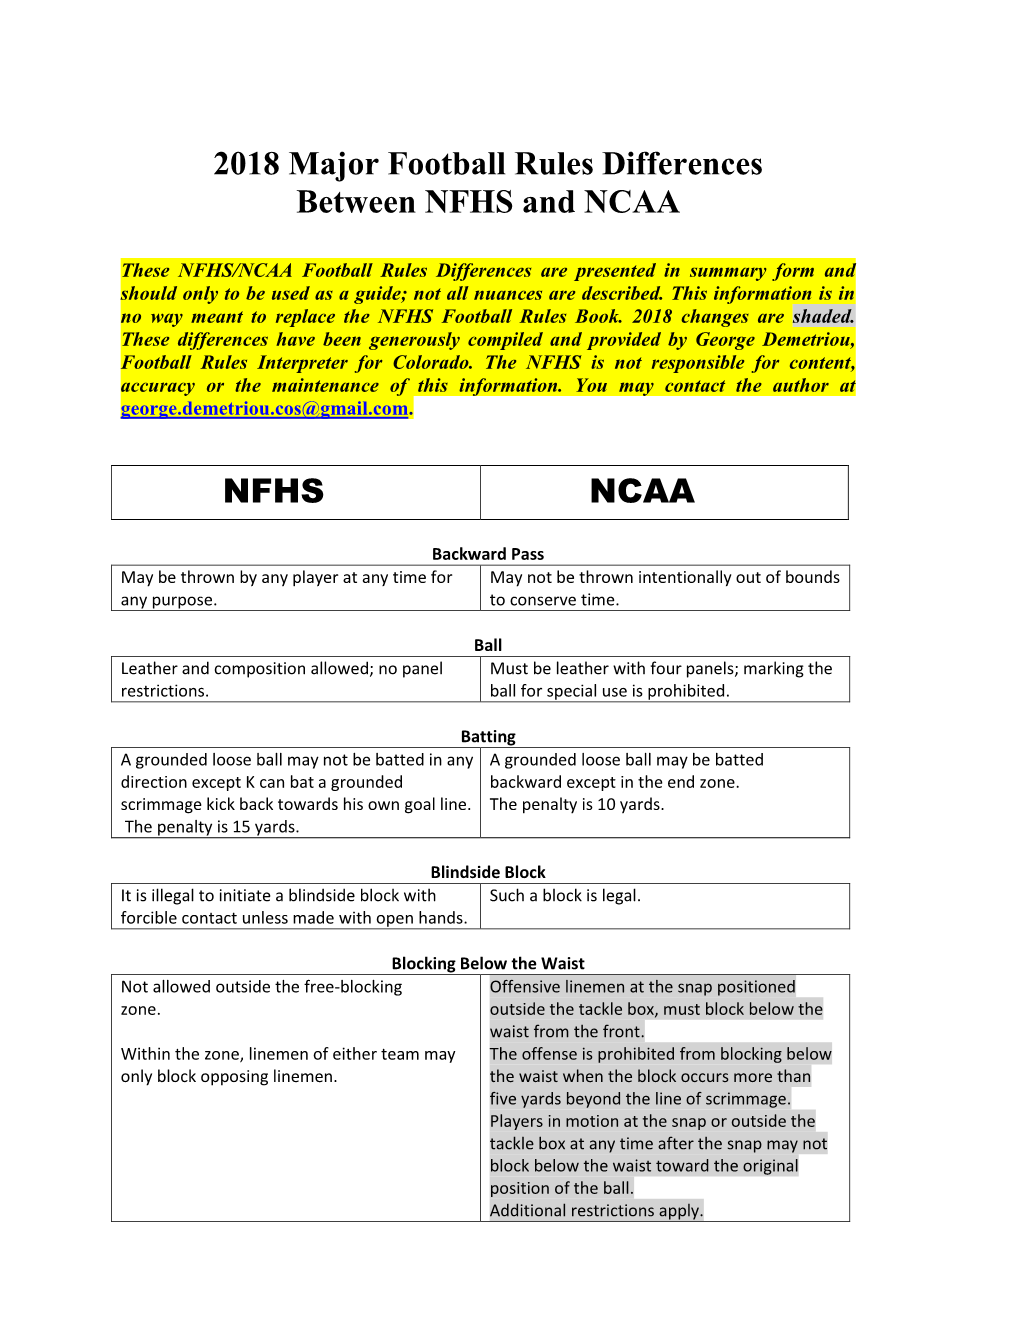 2018 Major Football Rules Differences Between NFHS and NCAA